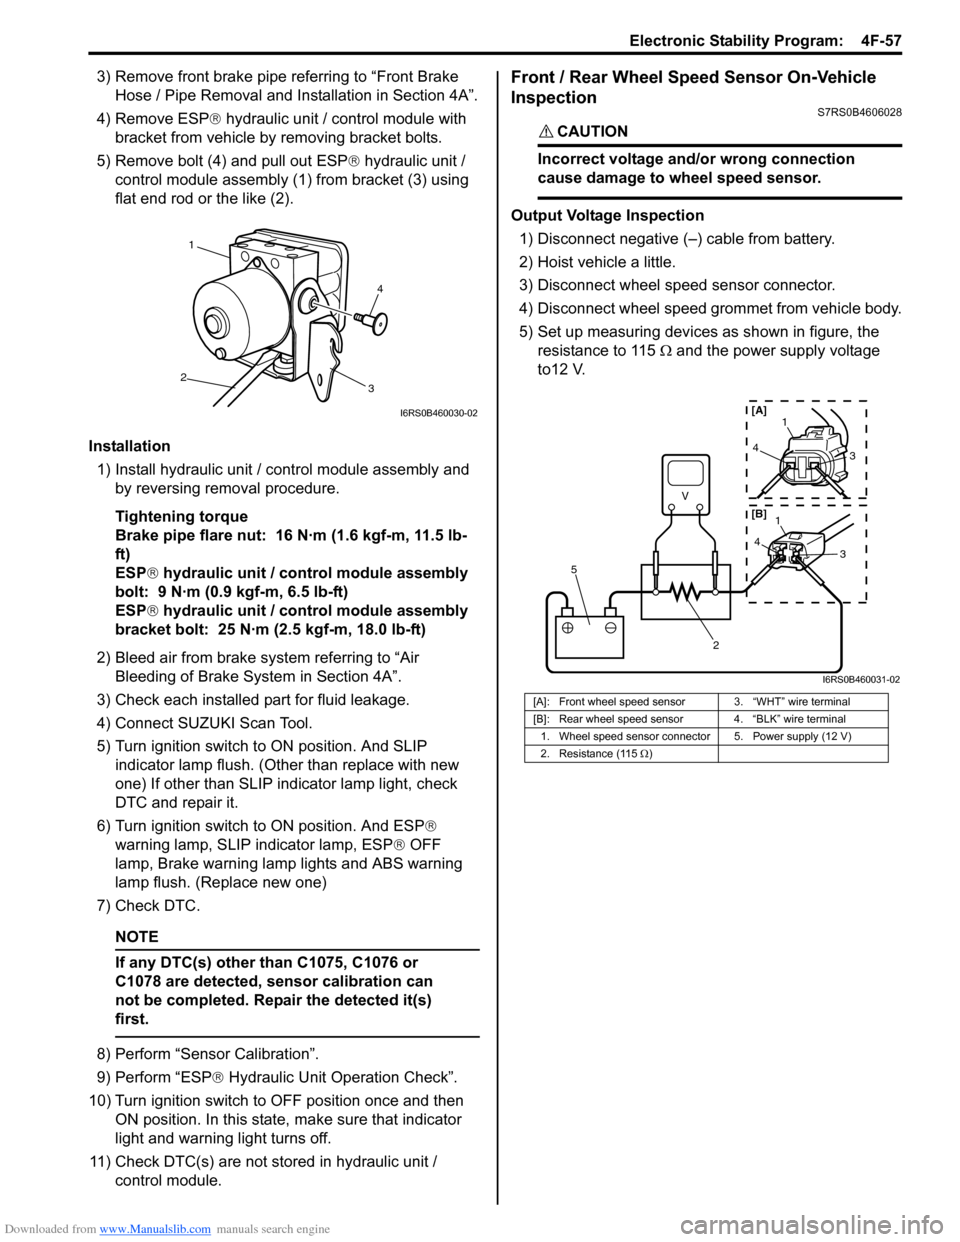 SUZUKI SWIFT 2007 2.G Service Workshop Manual Downloaded from www.Manualslib.com manuals search engine Electronic Stability Program:  4F-57
3) Remove front brake pipe referring to “Front Brake Hose / Pipe Removal and In stallation in Section 4A